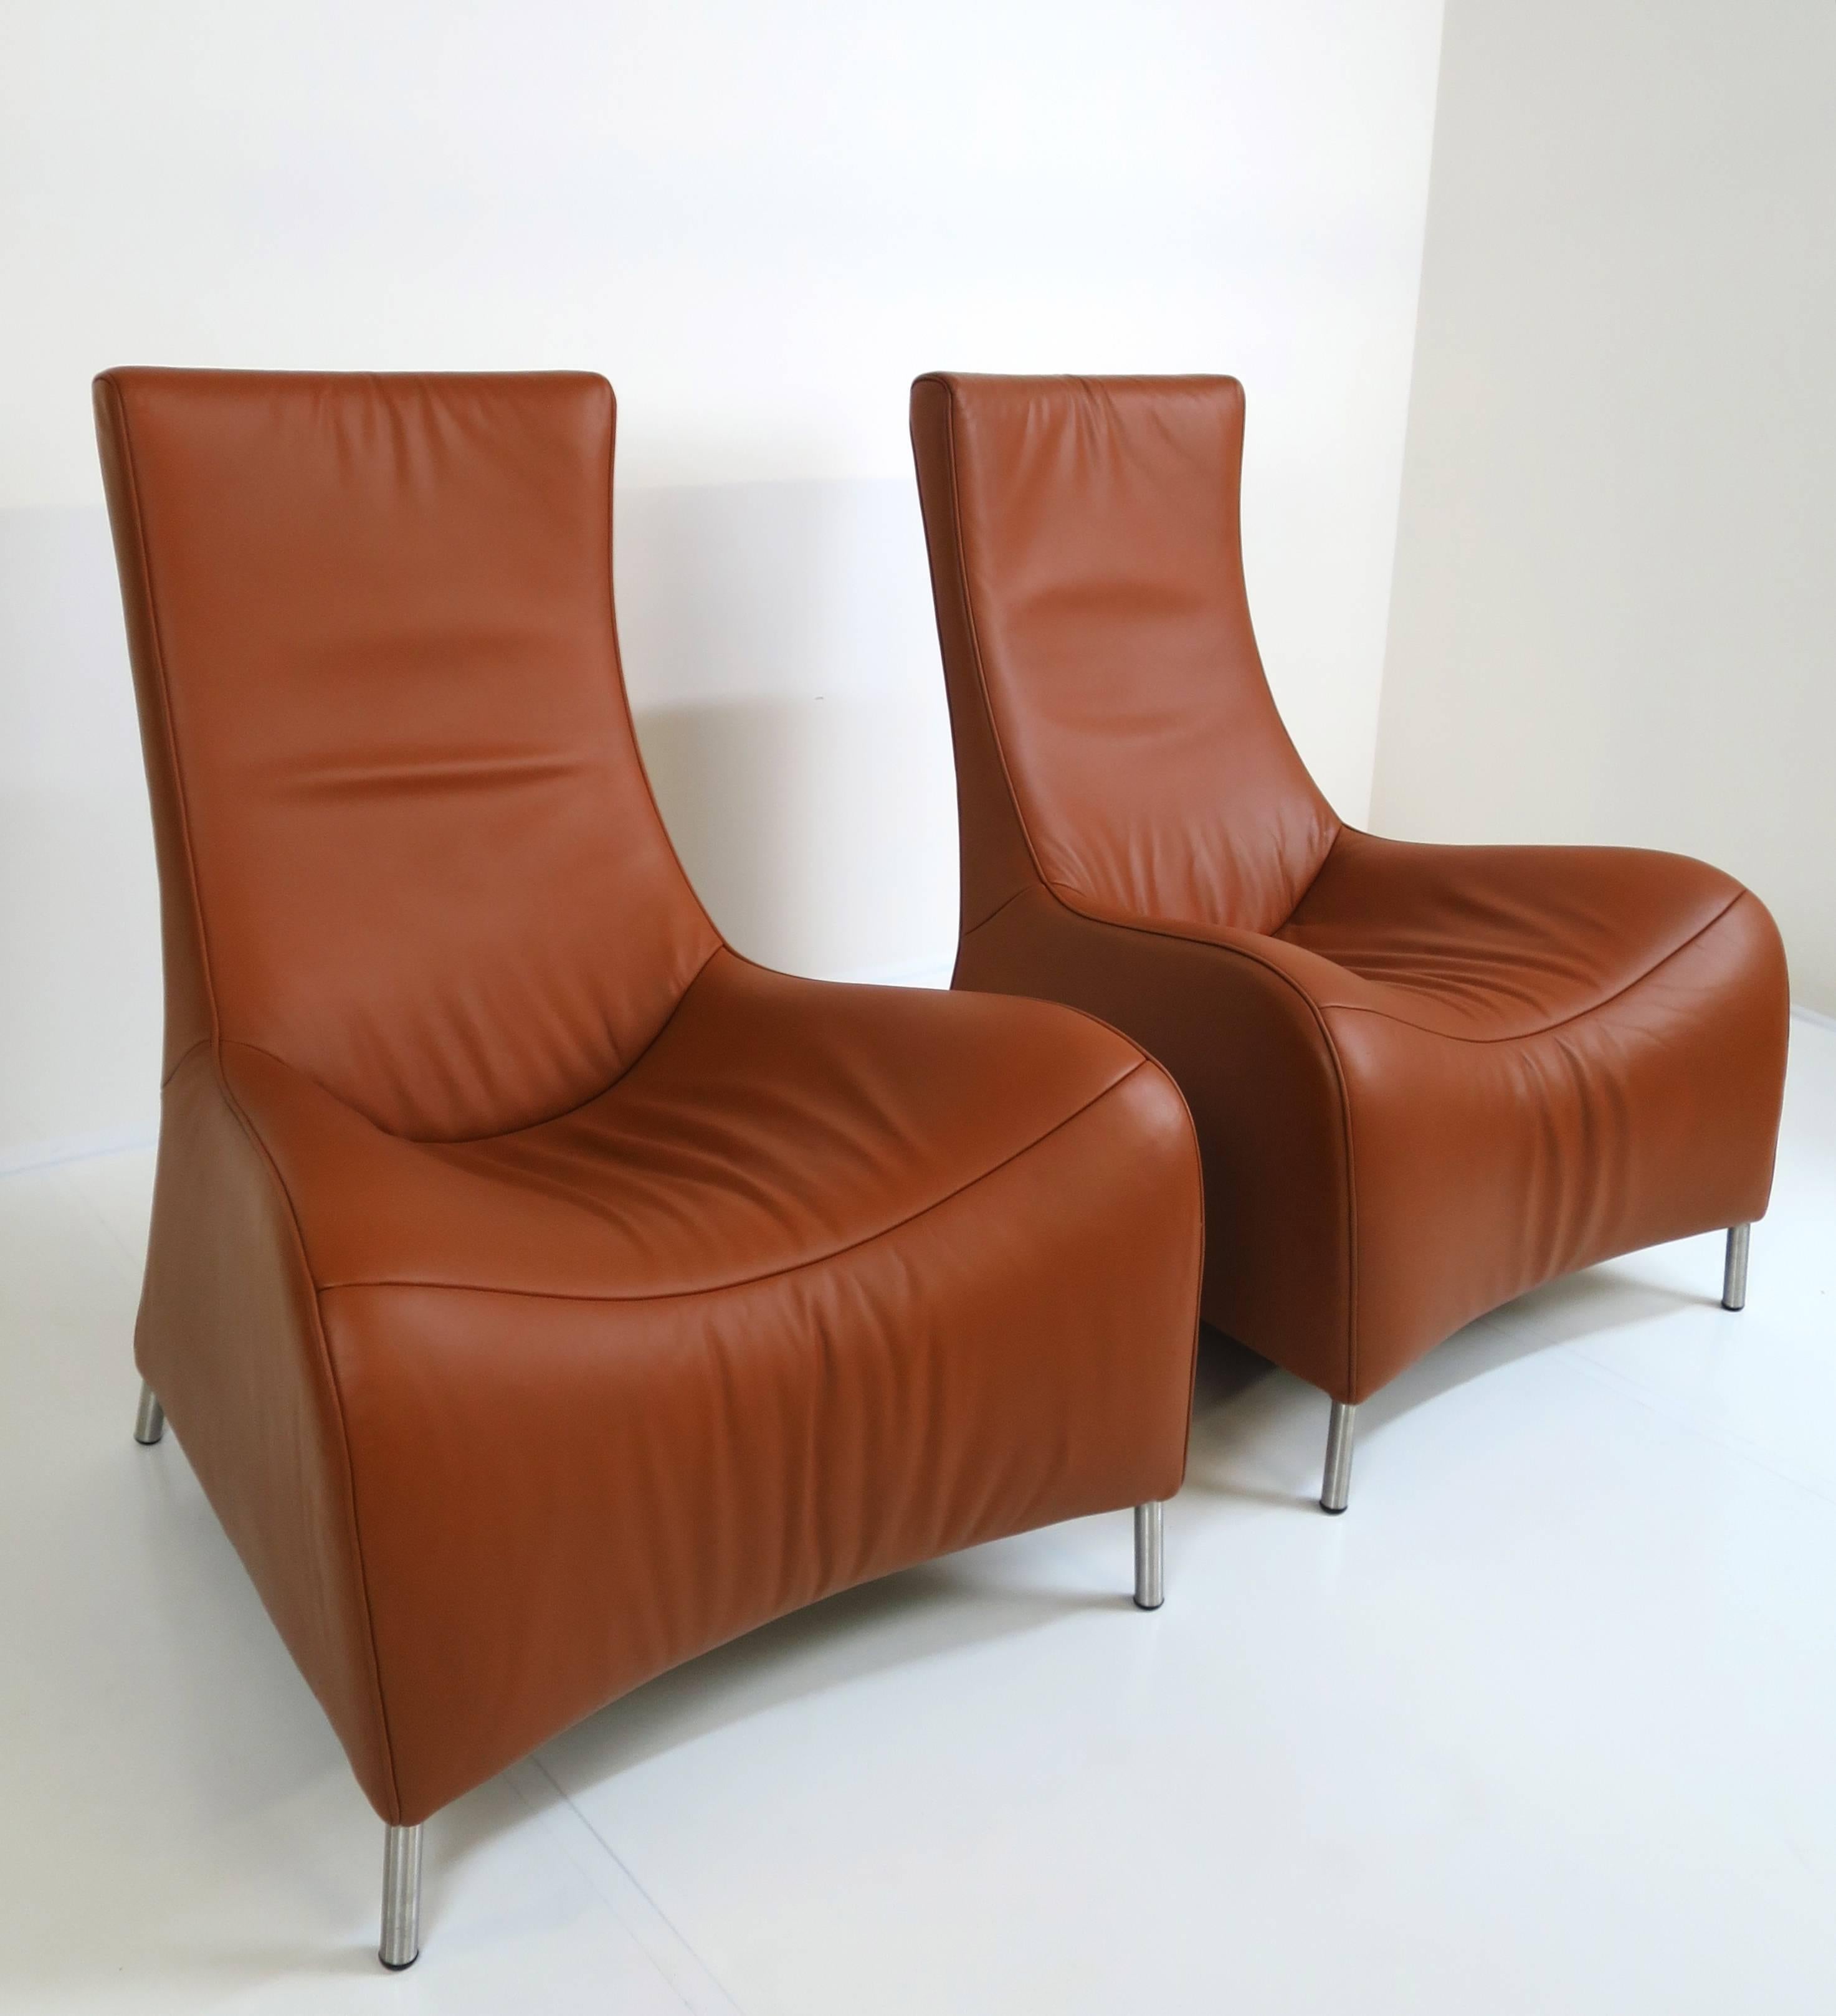 Two pairs (4 total) of De Sede, model DS 264 high back lounge chairs by Matthias Hoffmann. Nice original condition and leather in excellent condition after restoration recently performed. Overall, an exquisite looking design with maximum comfort!